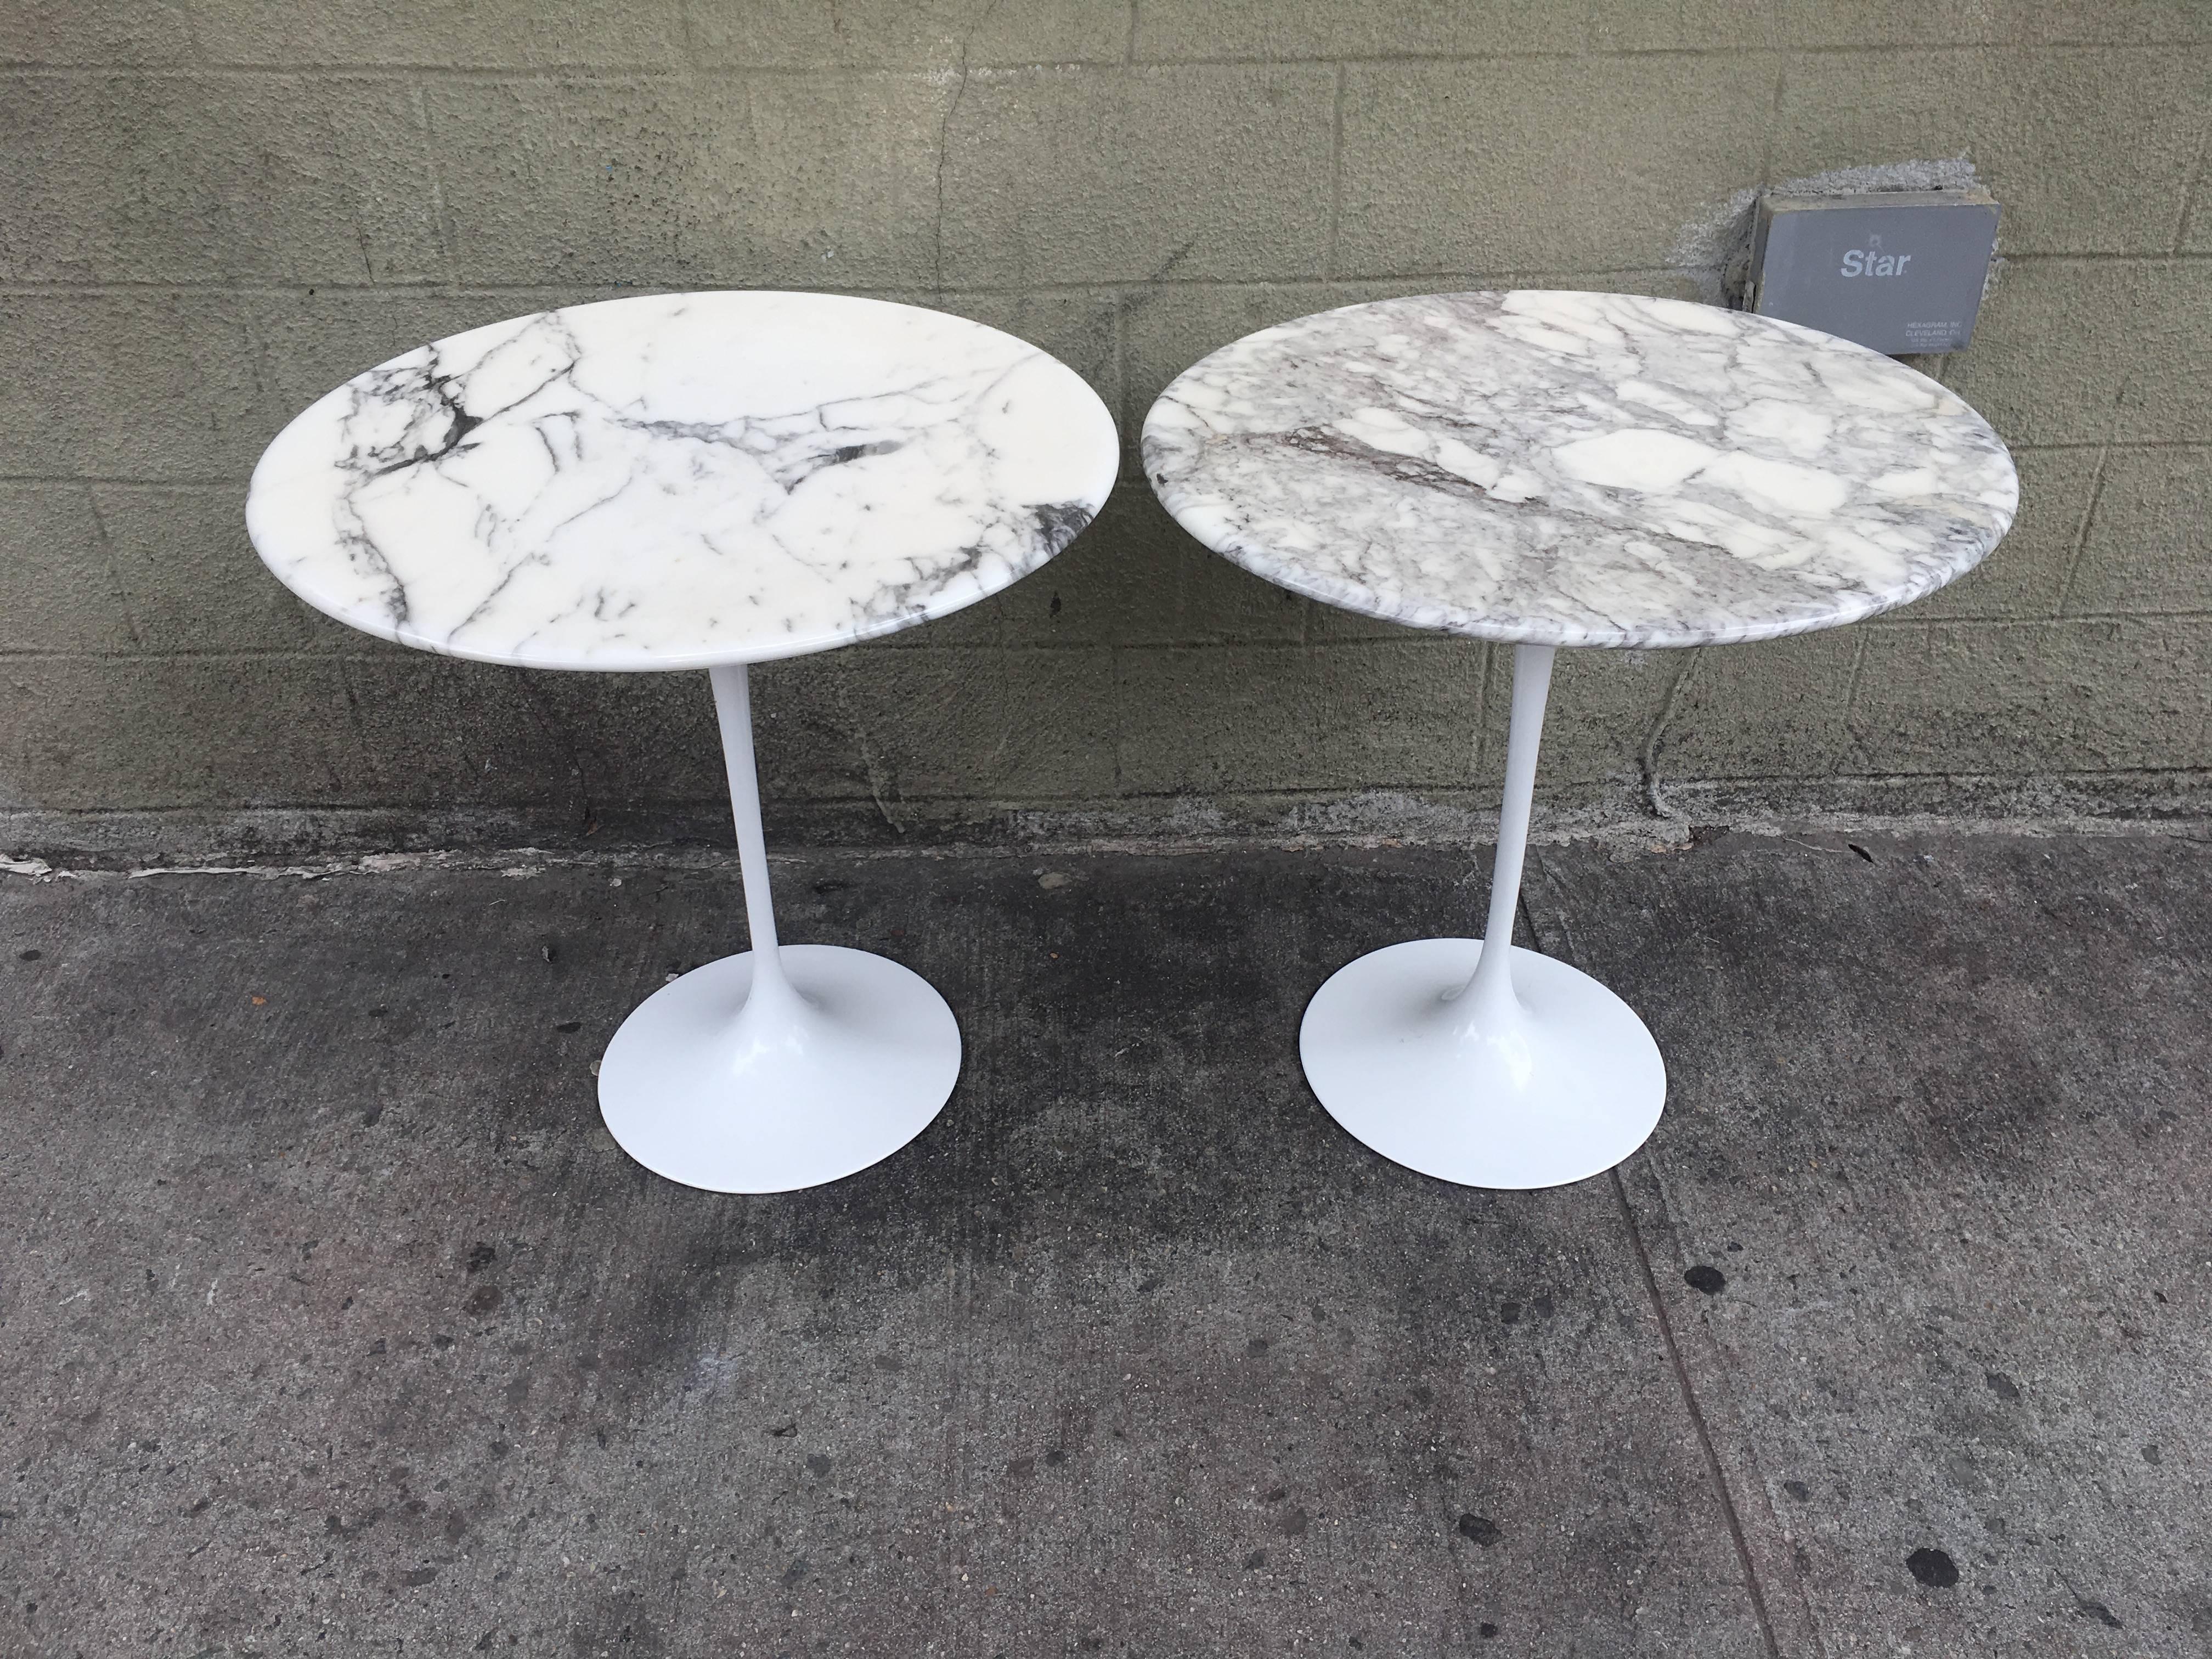 Two Eero Saarinen for Knoll Marble tulip side tables. In excellent condition.